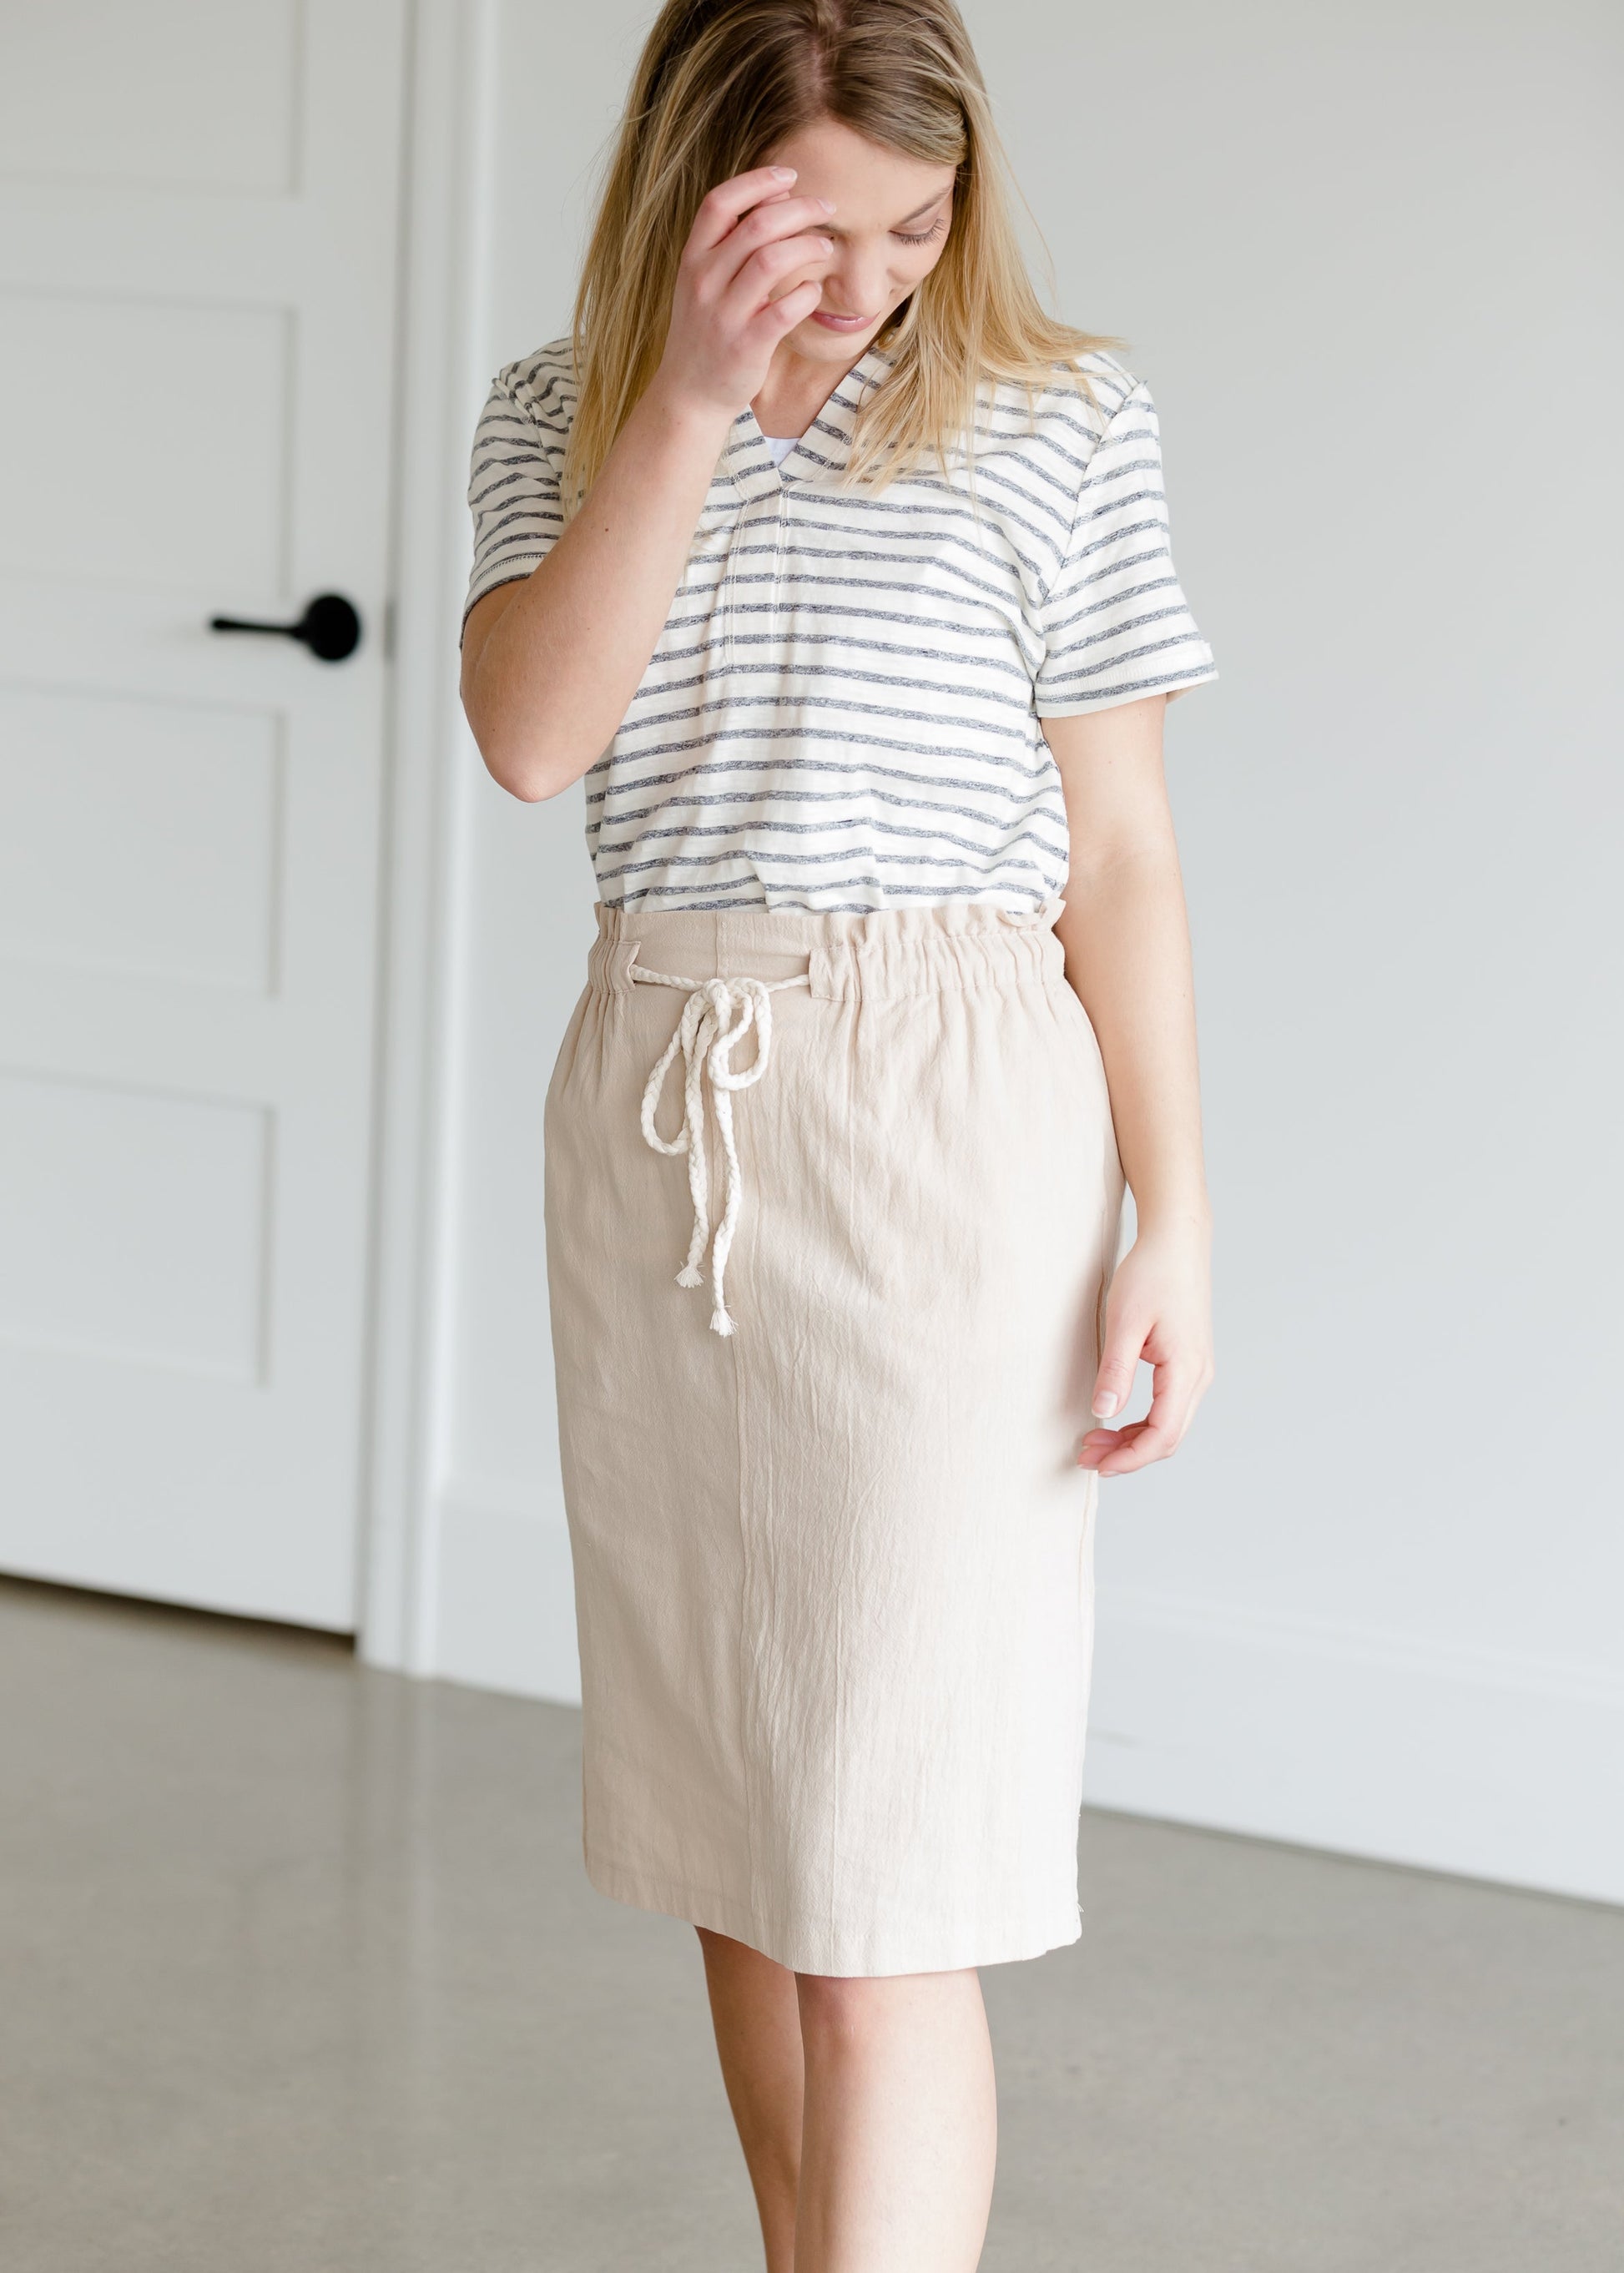 Cotton Belted Midi Skirt - FINAL SALE Skirts